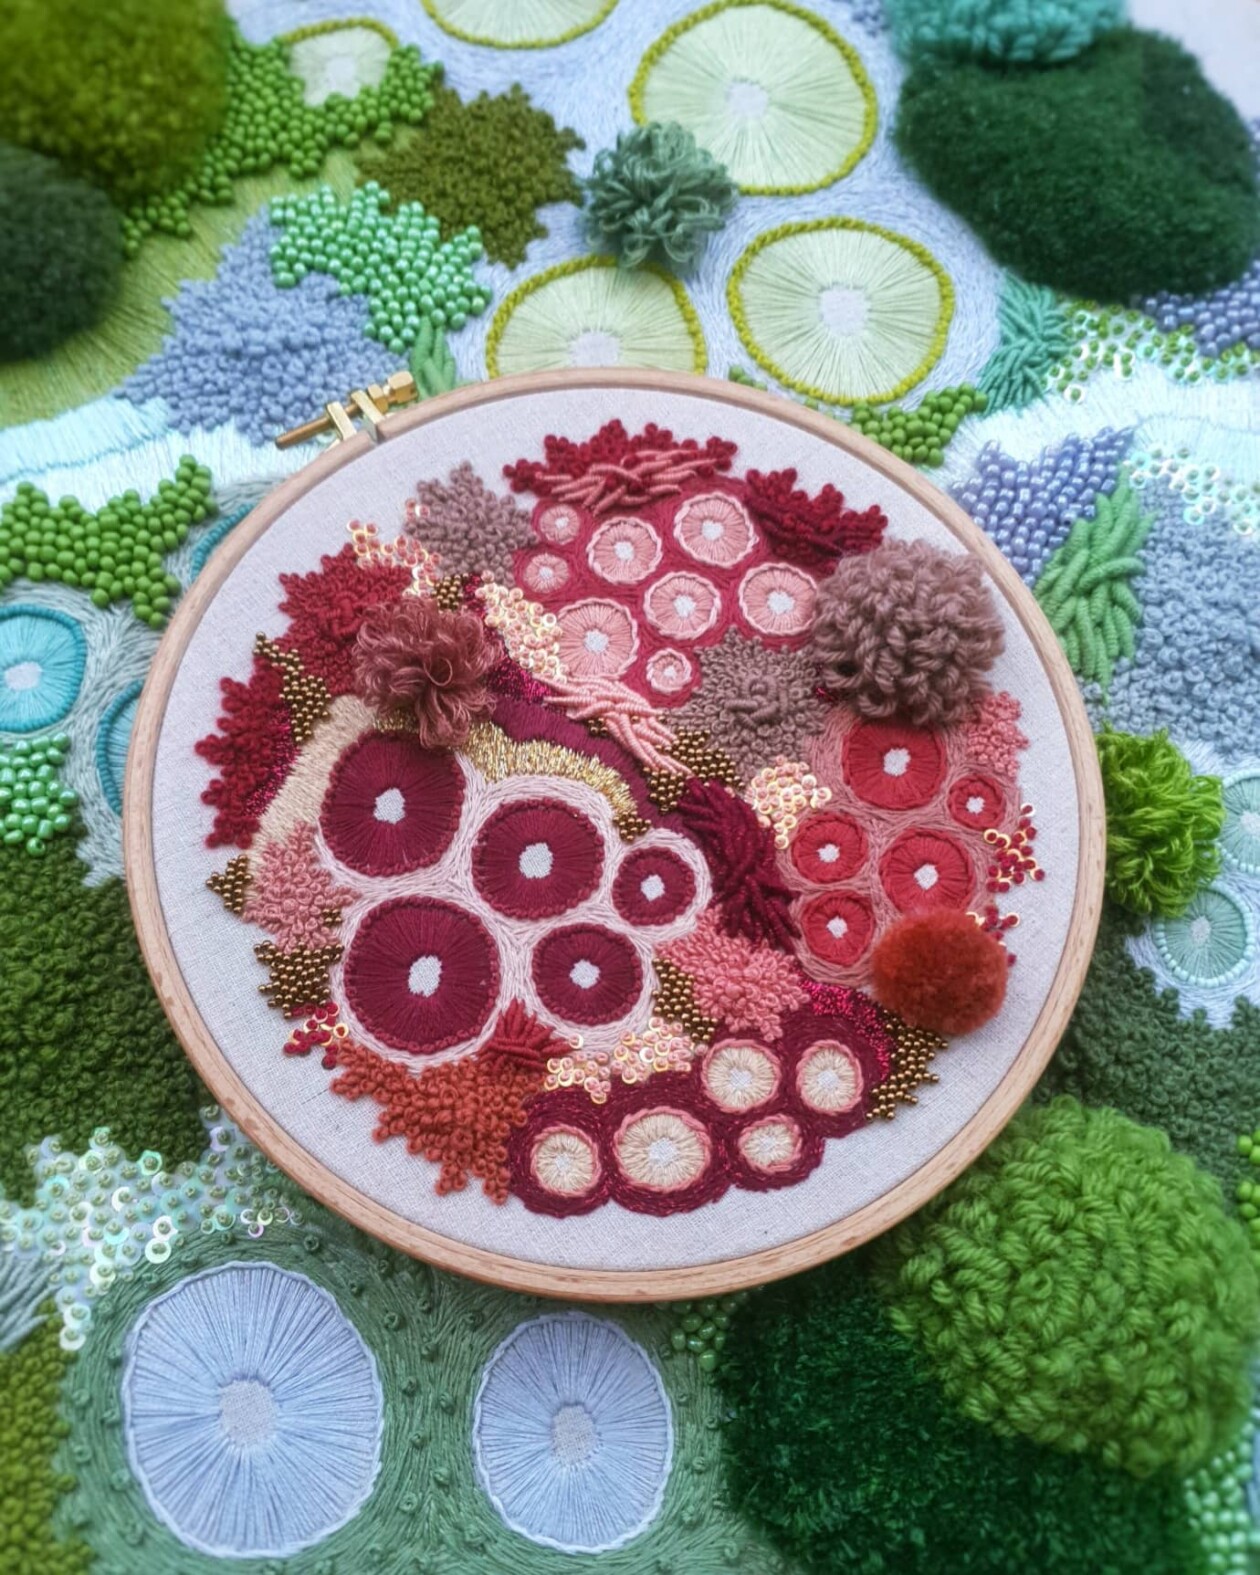 Marvelous Embroideries Inspired By Moss, Coral, And Lichen Forms By Hannah Kwasnycia (16)